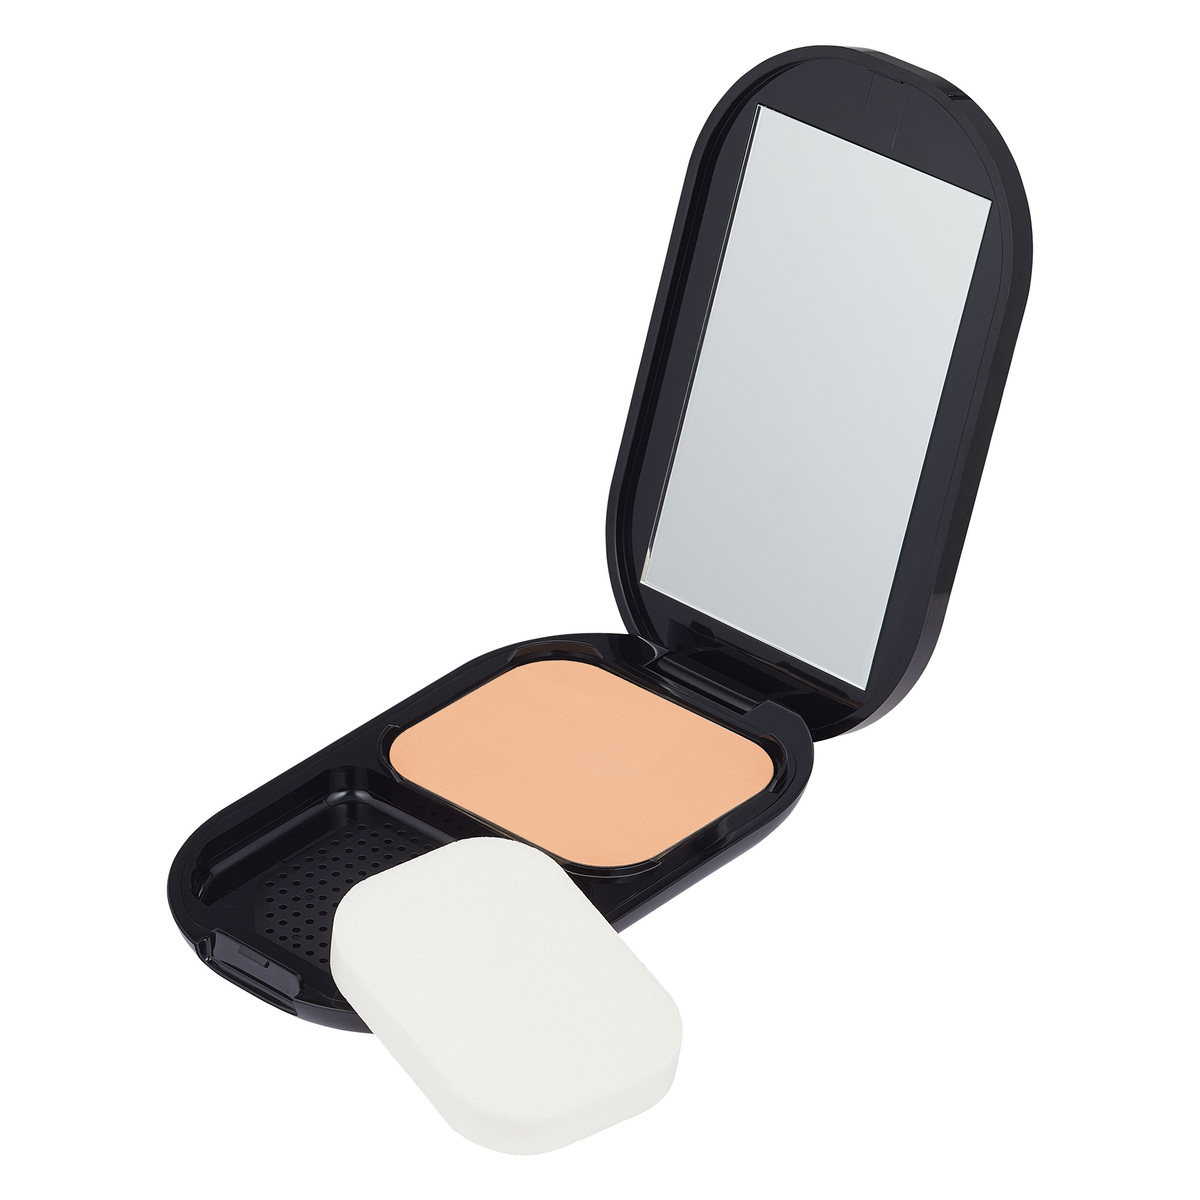 Max Factor Facefinity Compact Foundation Natural 03 1 pc